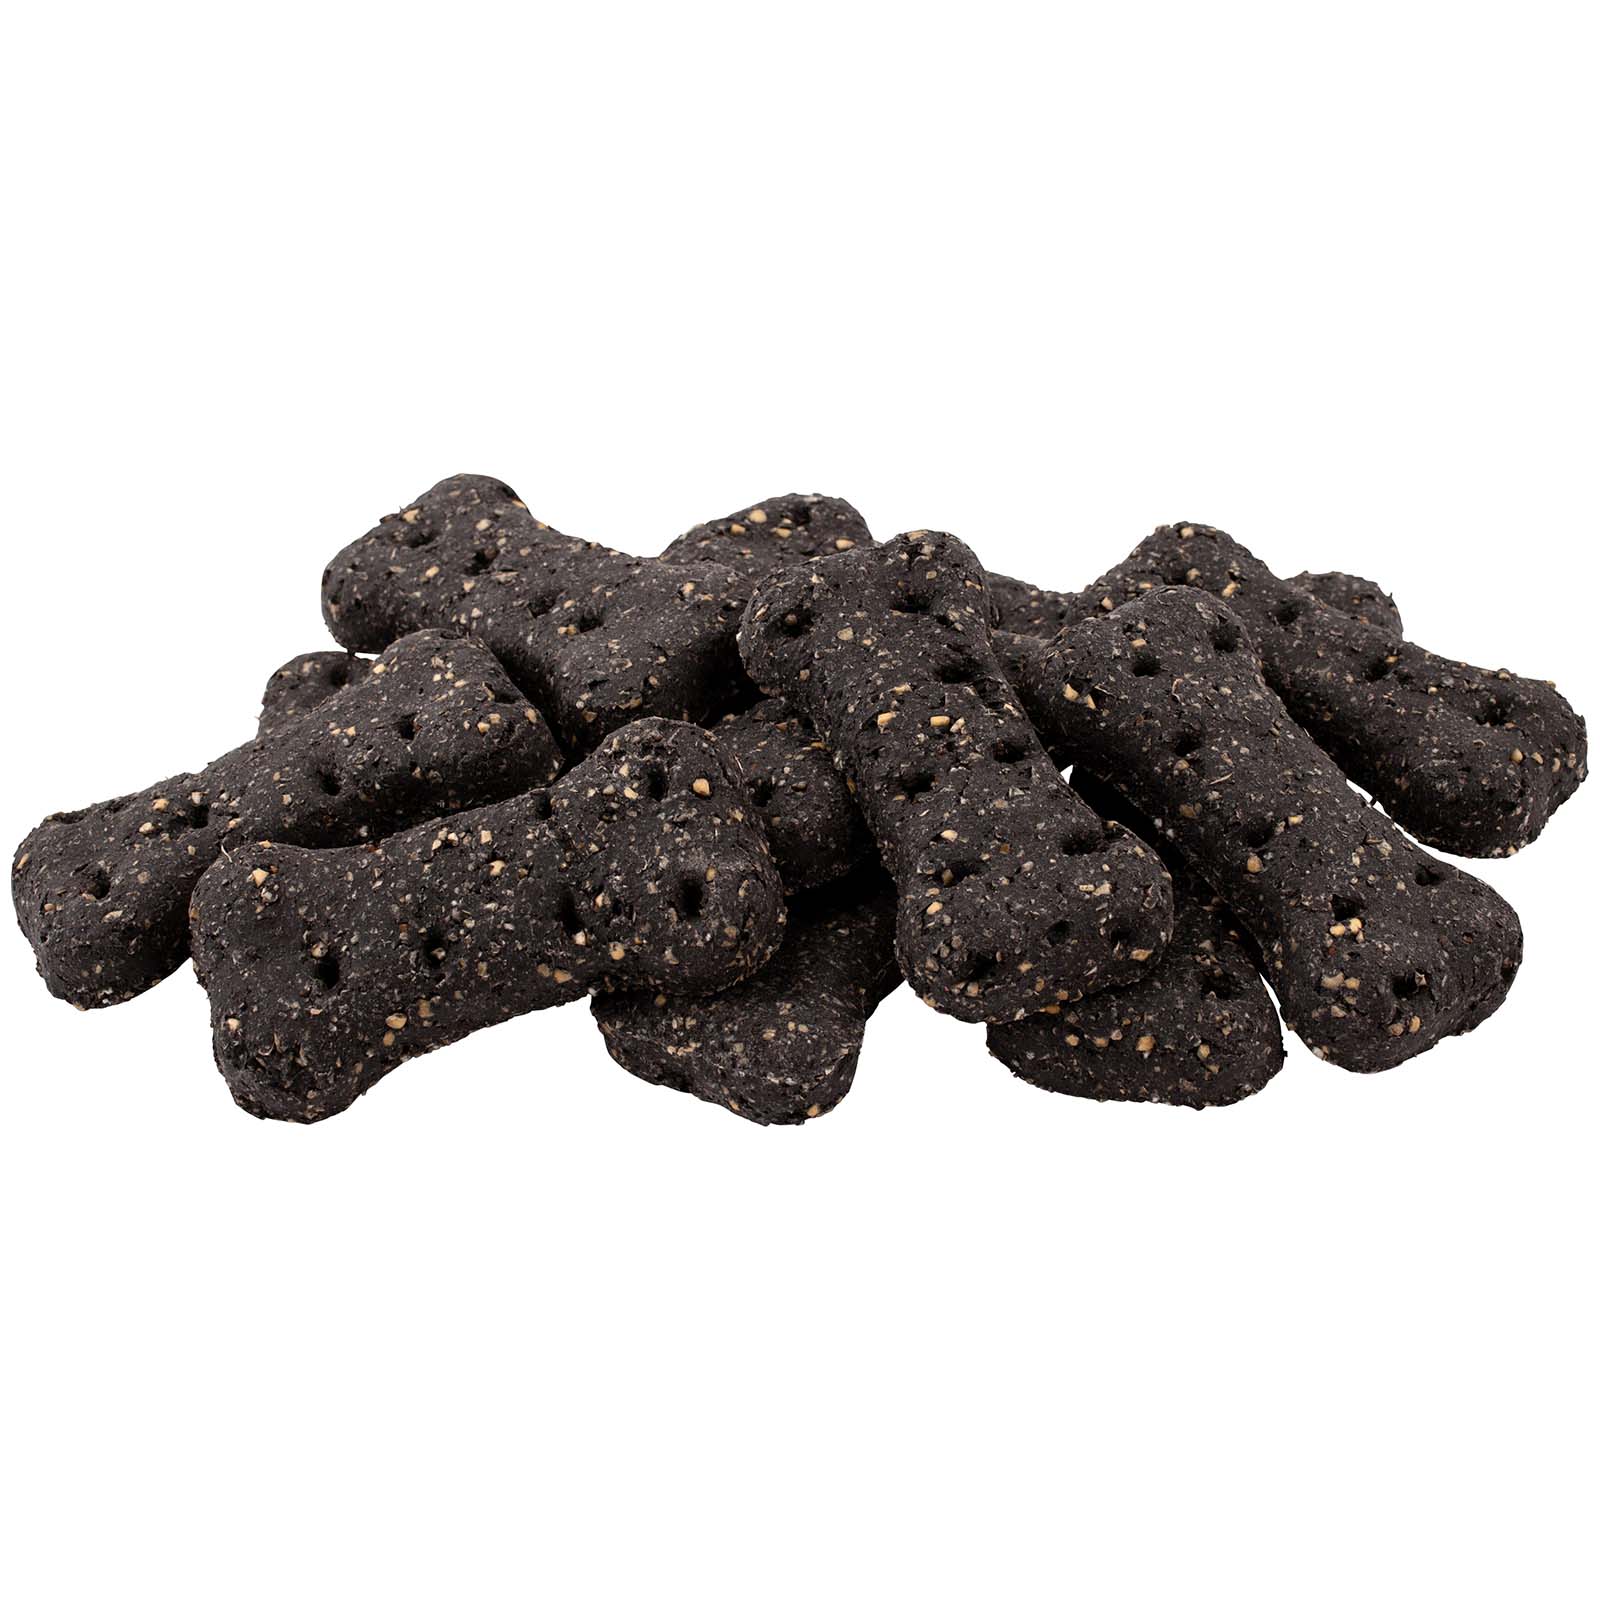 Black Dog Naturally Baked Charcoal Australian Biscuit Treats for Dogs 5kg image 0